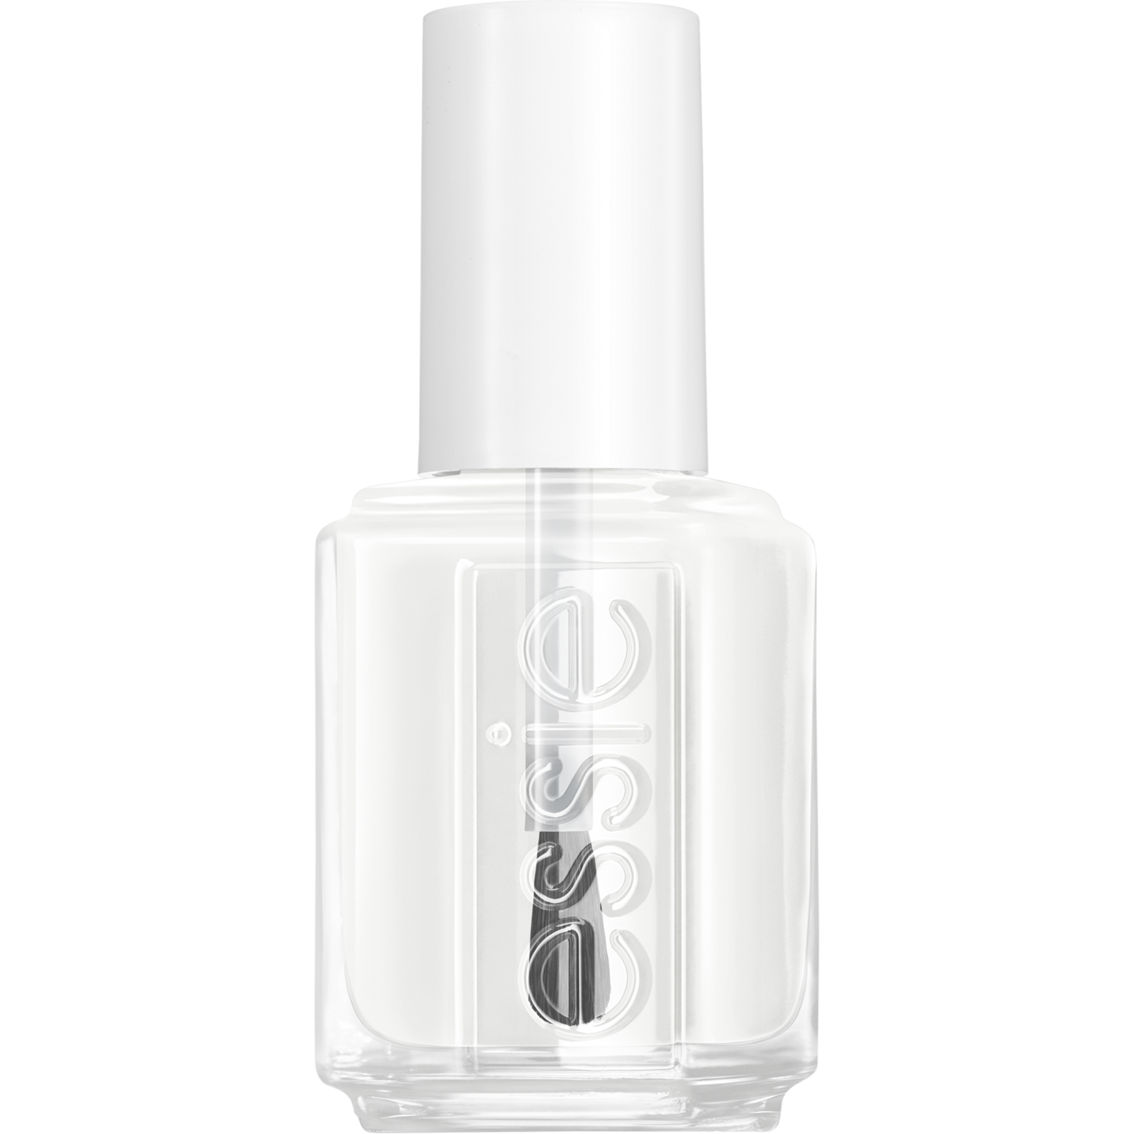 Essie Nail Care Hard to Resist Advanced Nail Strengthener - Image 2 of 3